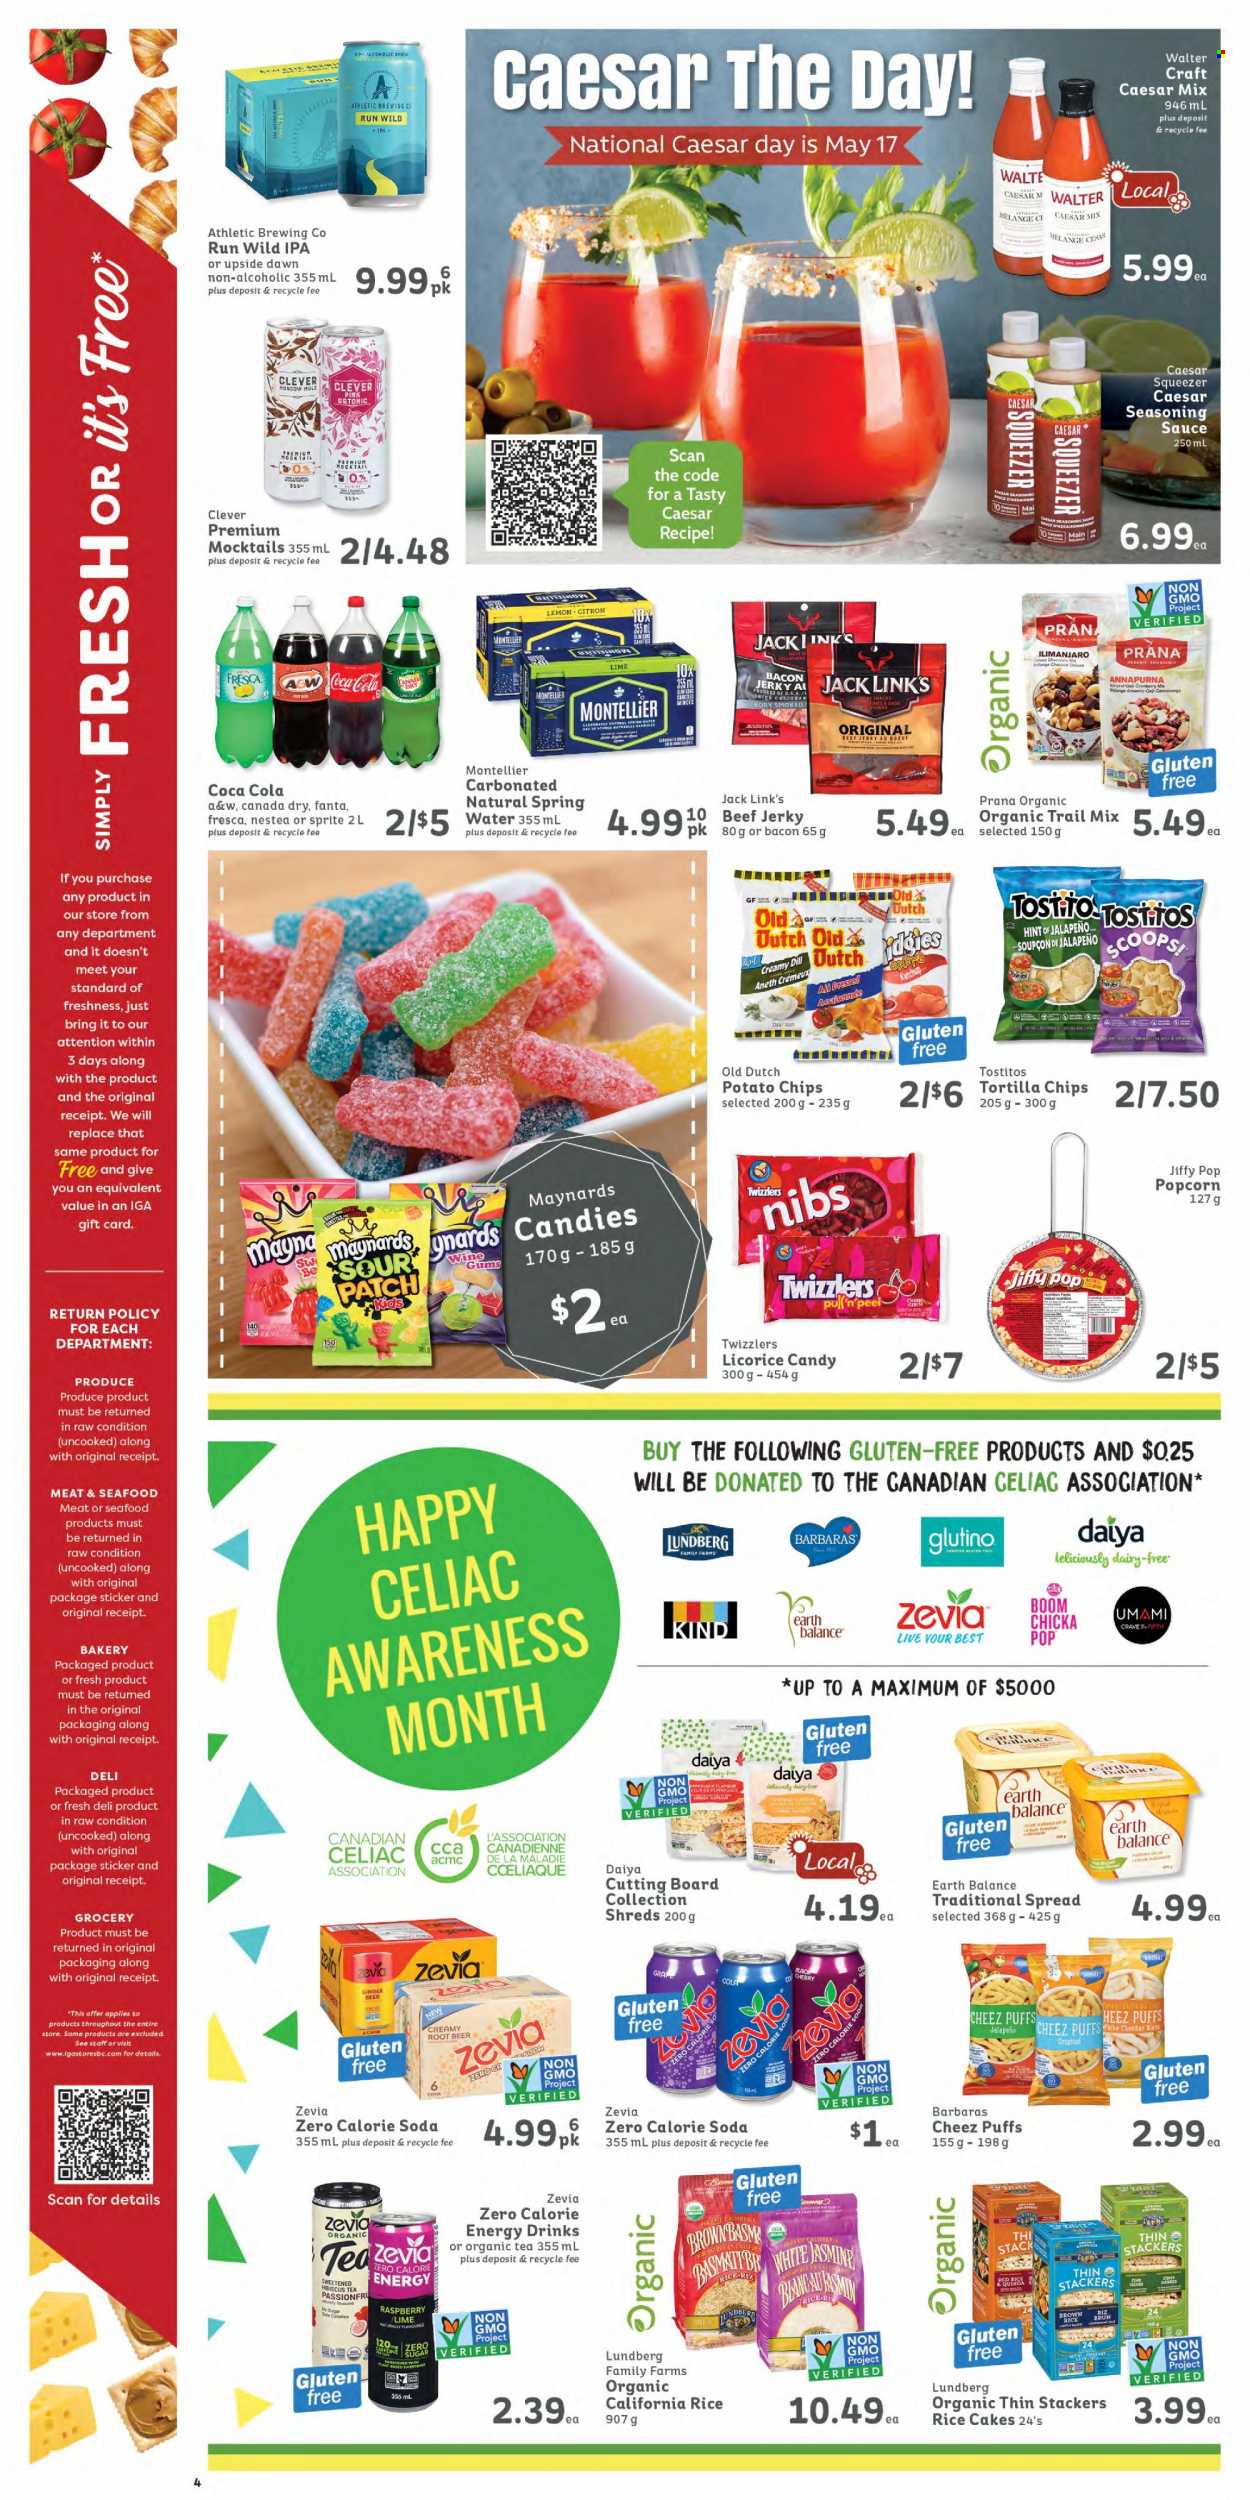 thumbnail - IGA Simple Goodness Flyer - May 13, 2022 - May 19, 2022 - Sales products - puffs, jalapeño, cherries, seafood, sauce, bacon, beef jerky, jerky, sour patch, tortilla chips, potato chips, chips, popcorn, Tostitos, Jack Link's, rice, dill, spice, trail mix, Canada Dry, Sprite, Fanta, energy drink, A&W, soda, tea, beer, IPA, quinoa, ketchup, ginger beer. Page 4.